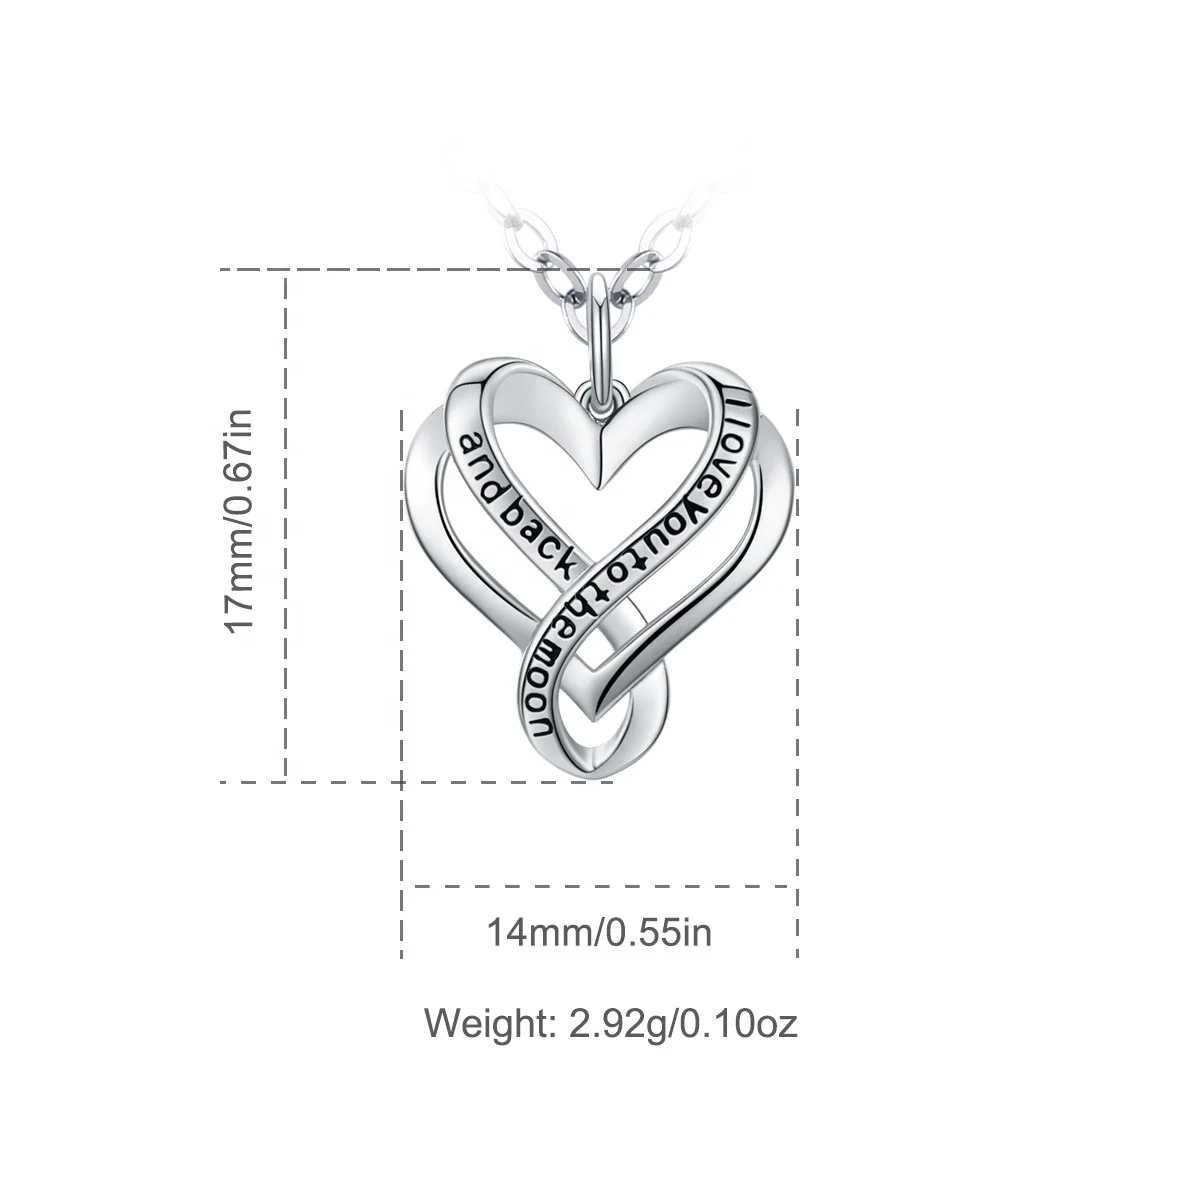 
Isunni i love you to the moon and back heart pendant necklace for girlfriend 